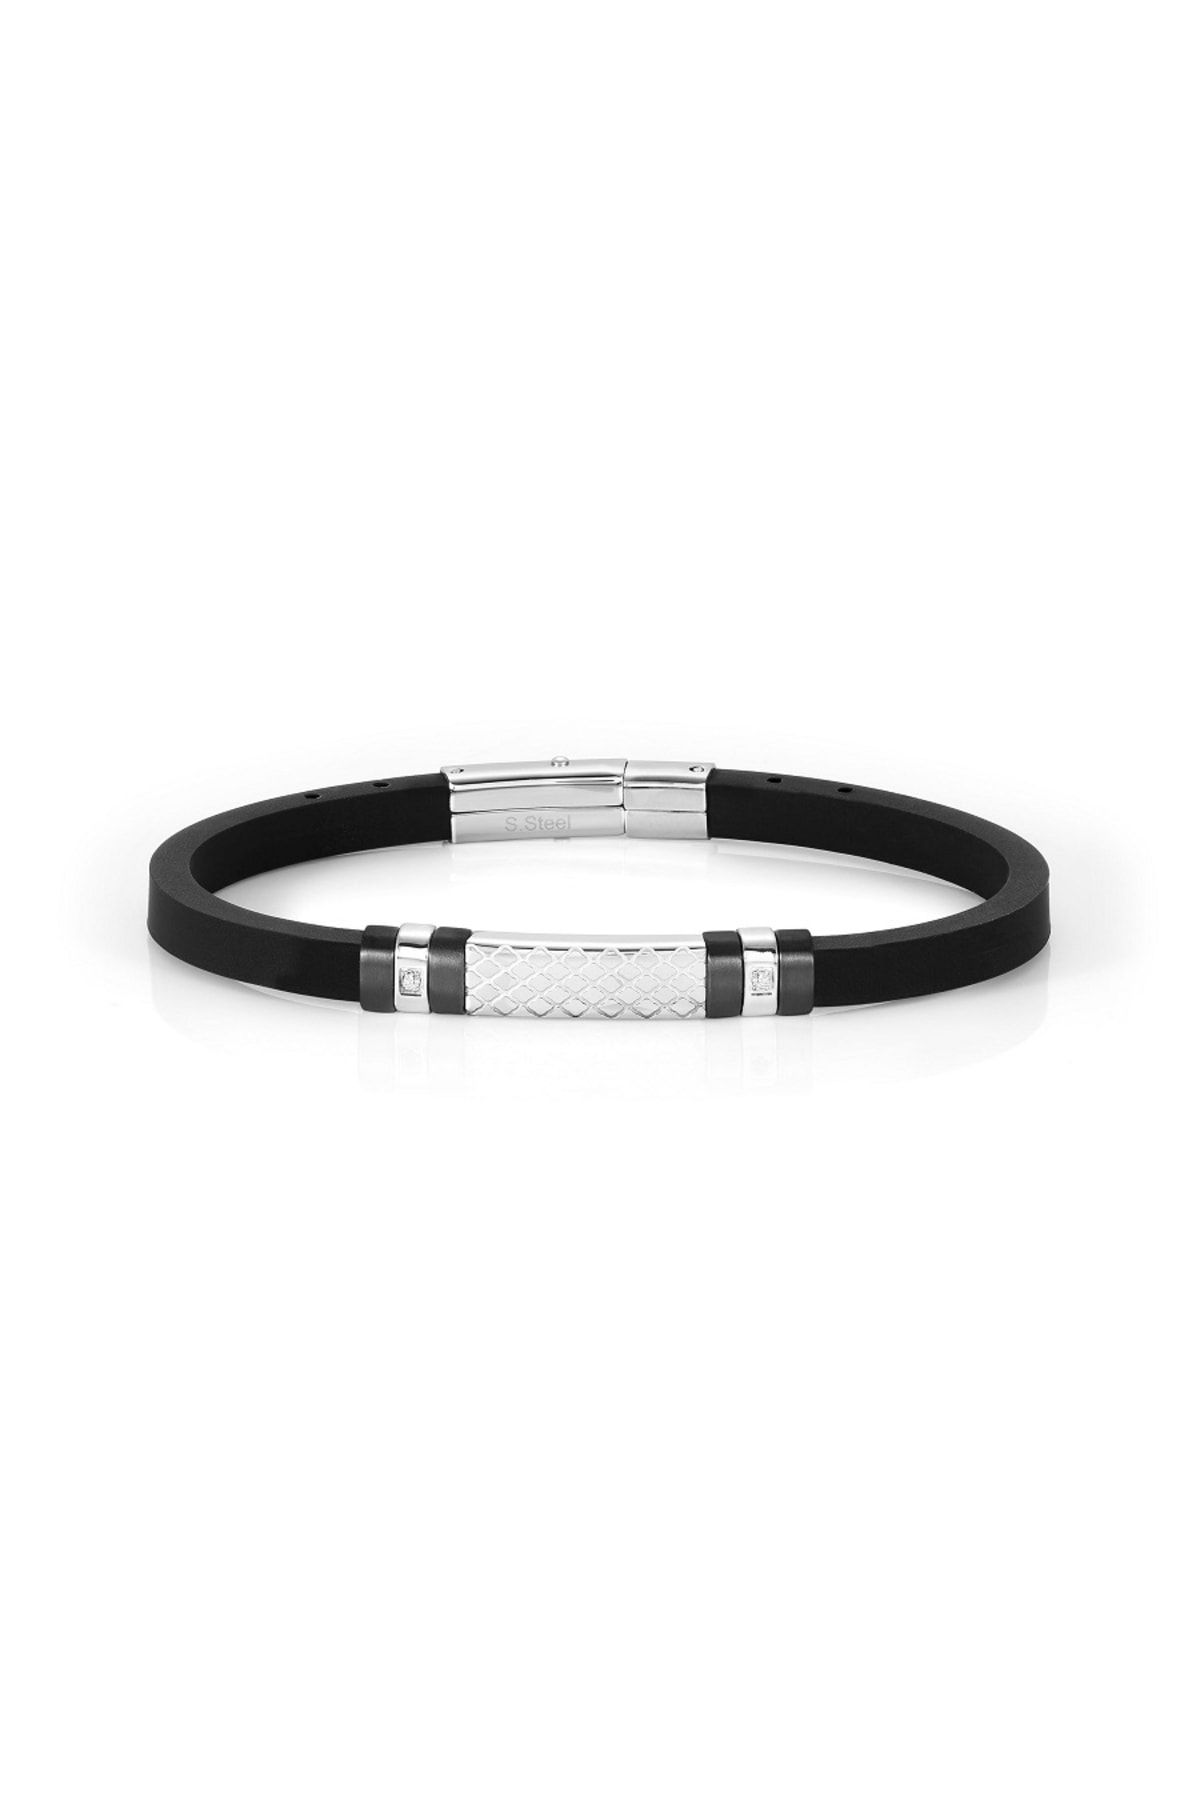 NOMİNATİON Cıty Bracelet In Steel, Rubber And 2 Cz With Pvd Finish (015_black)